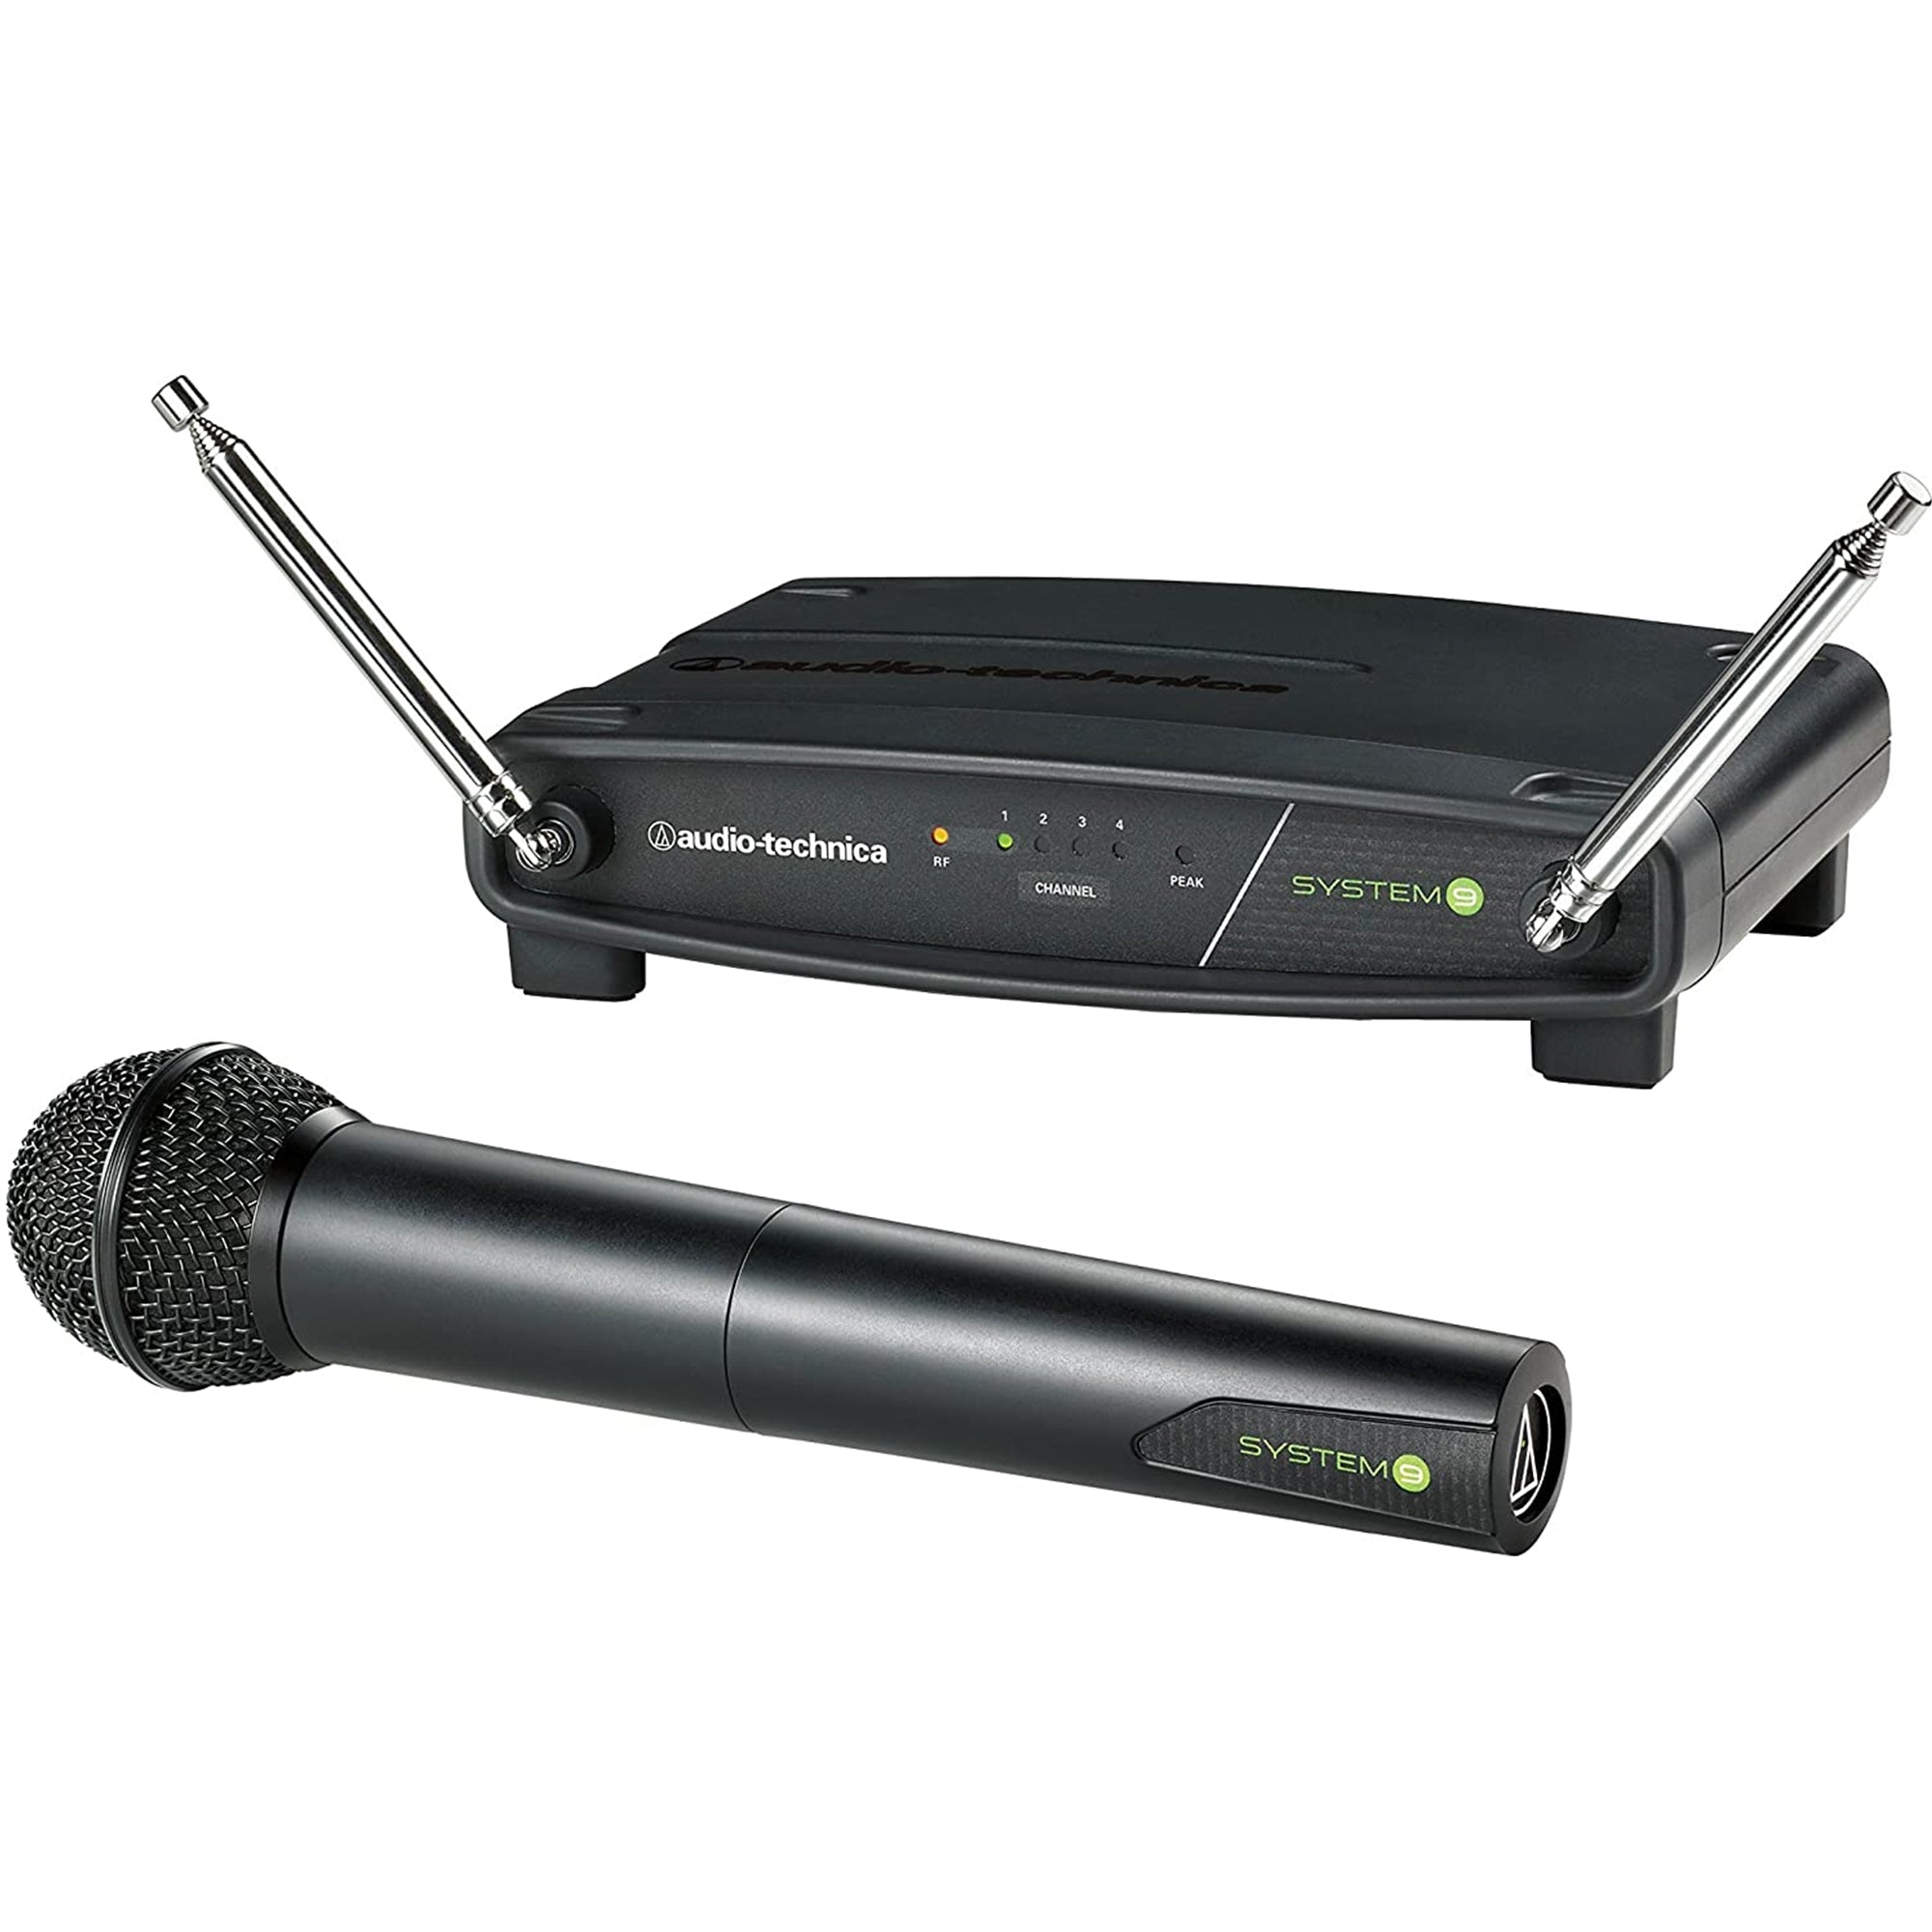 AUDIO TECHNICA ATW902A System 9 Handheld Wireless Microphone